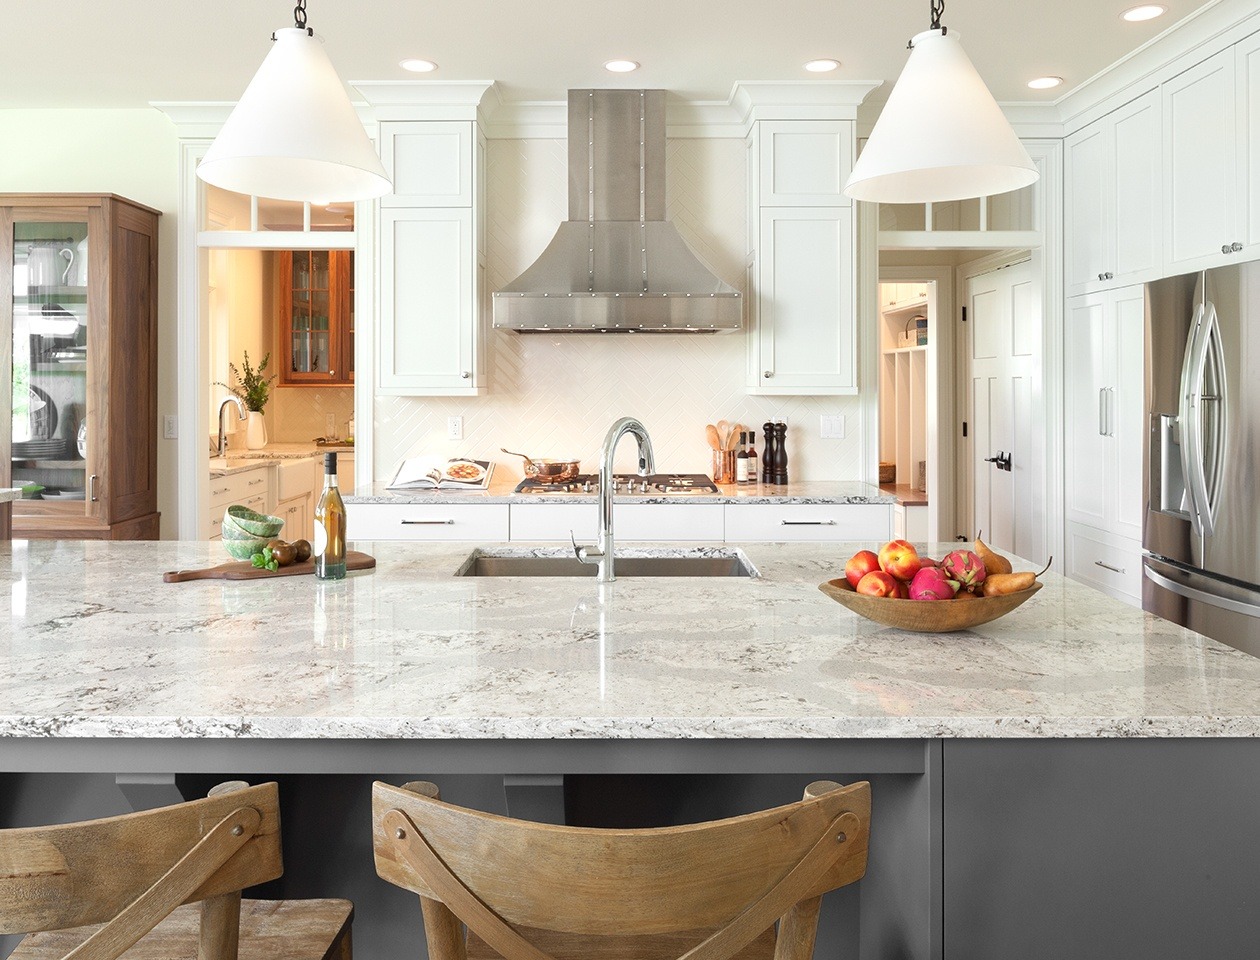 Your guide to granite, marble, quartz, and other countertop materials